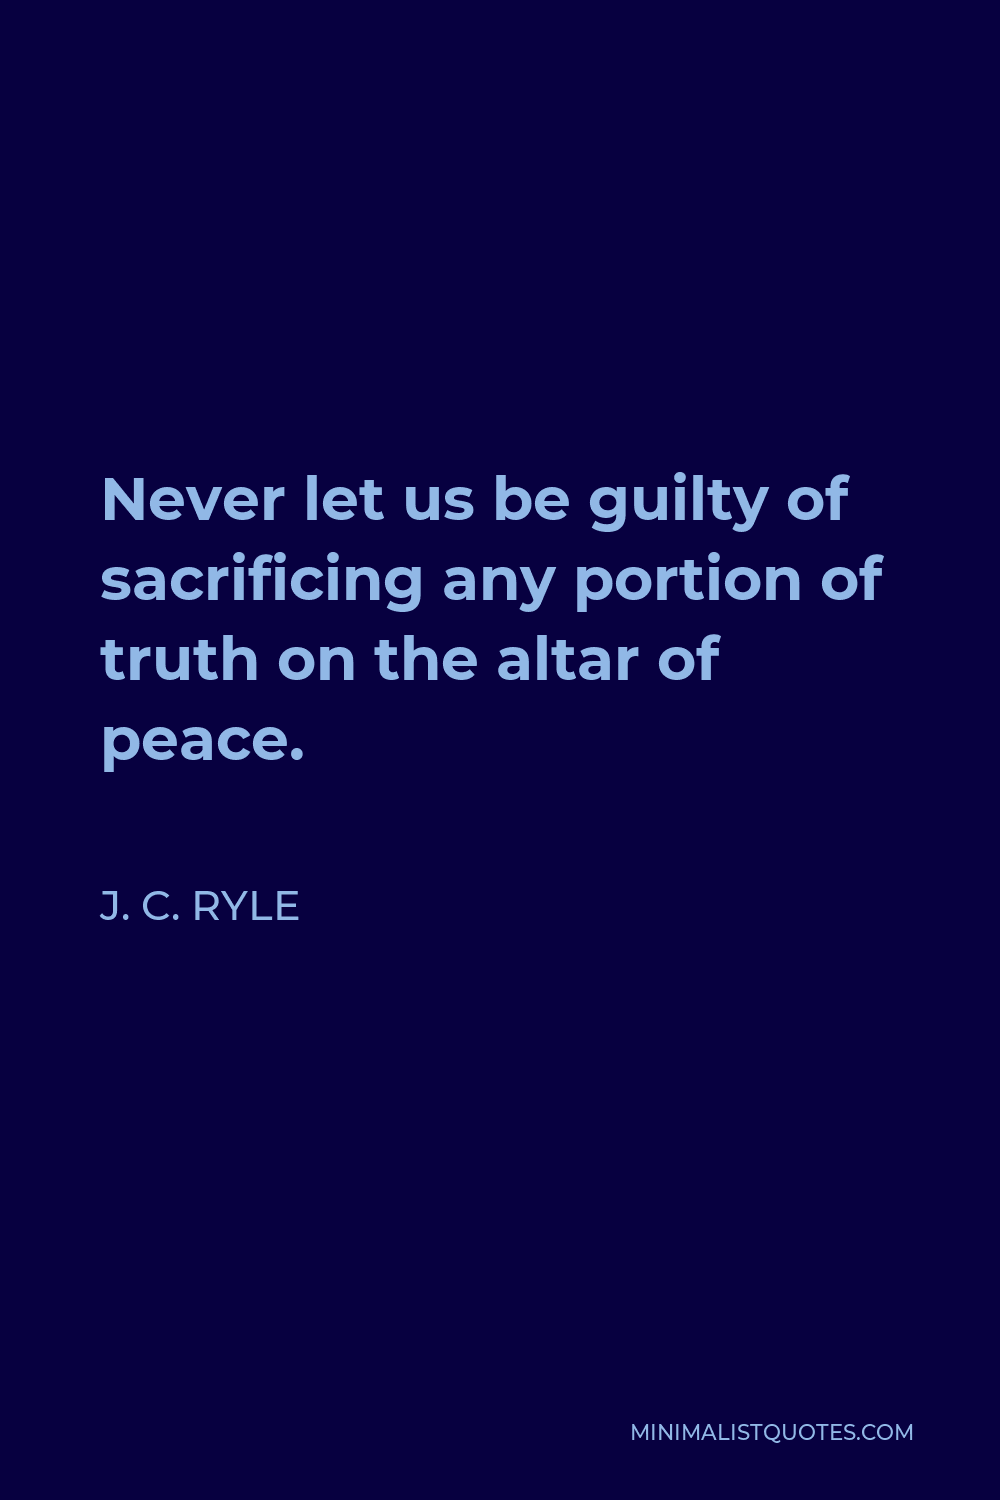 J. C. Ryle Quote - Never let us be guilty of sacrificing any portion of truth on the altar of peace.